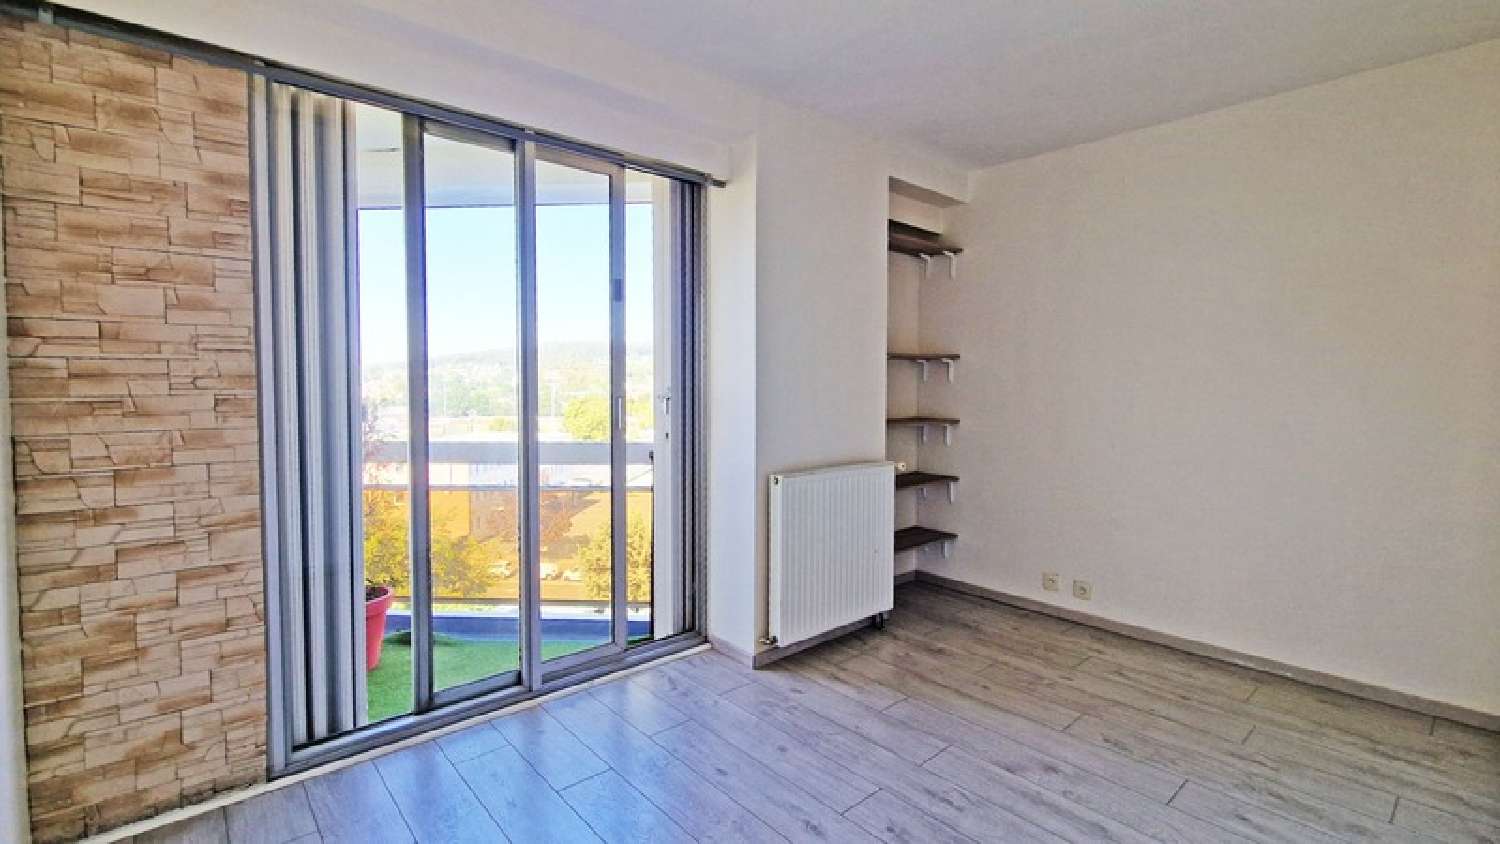  kaufen Wohnung/ Apartment Soisy-sous-Montmorency Val-d'Oise 8